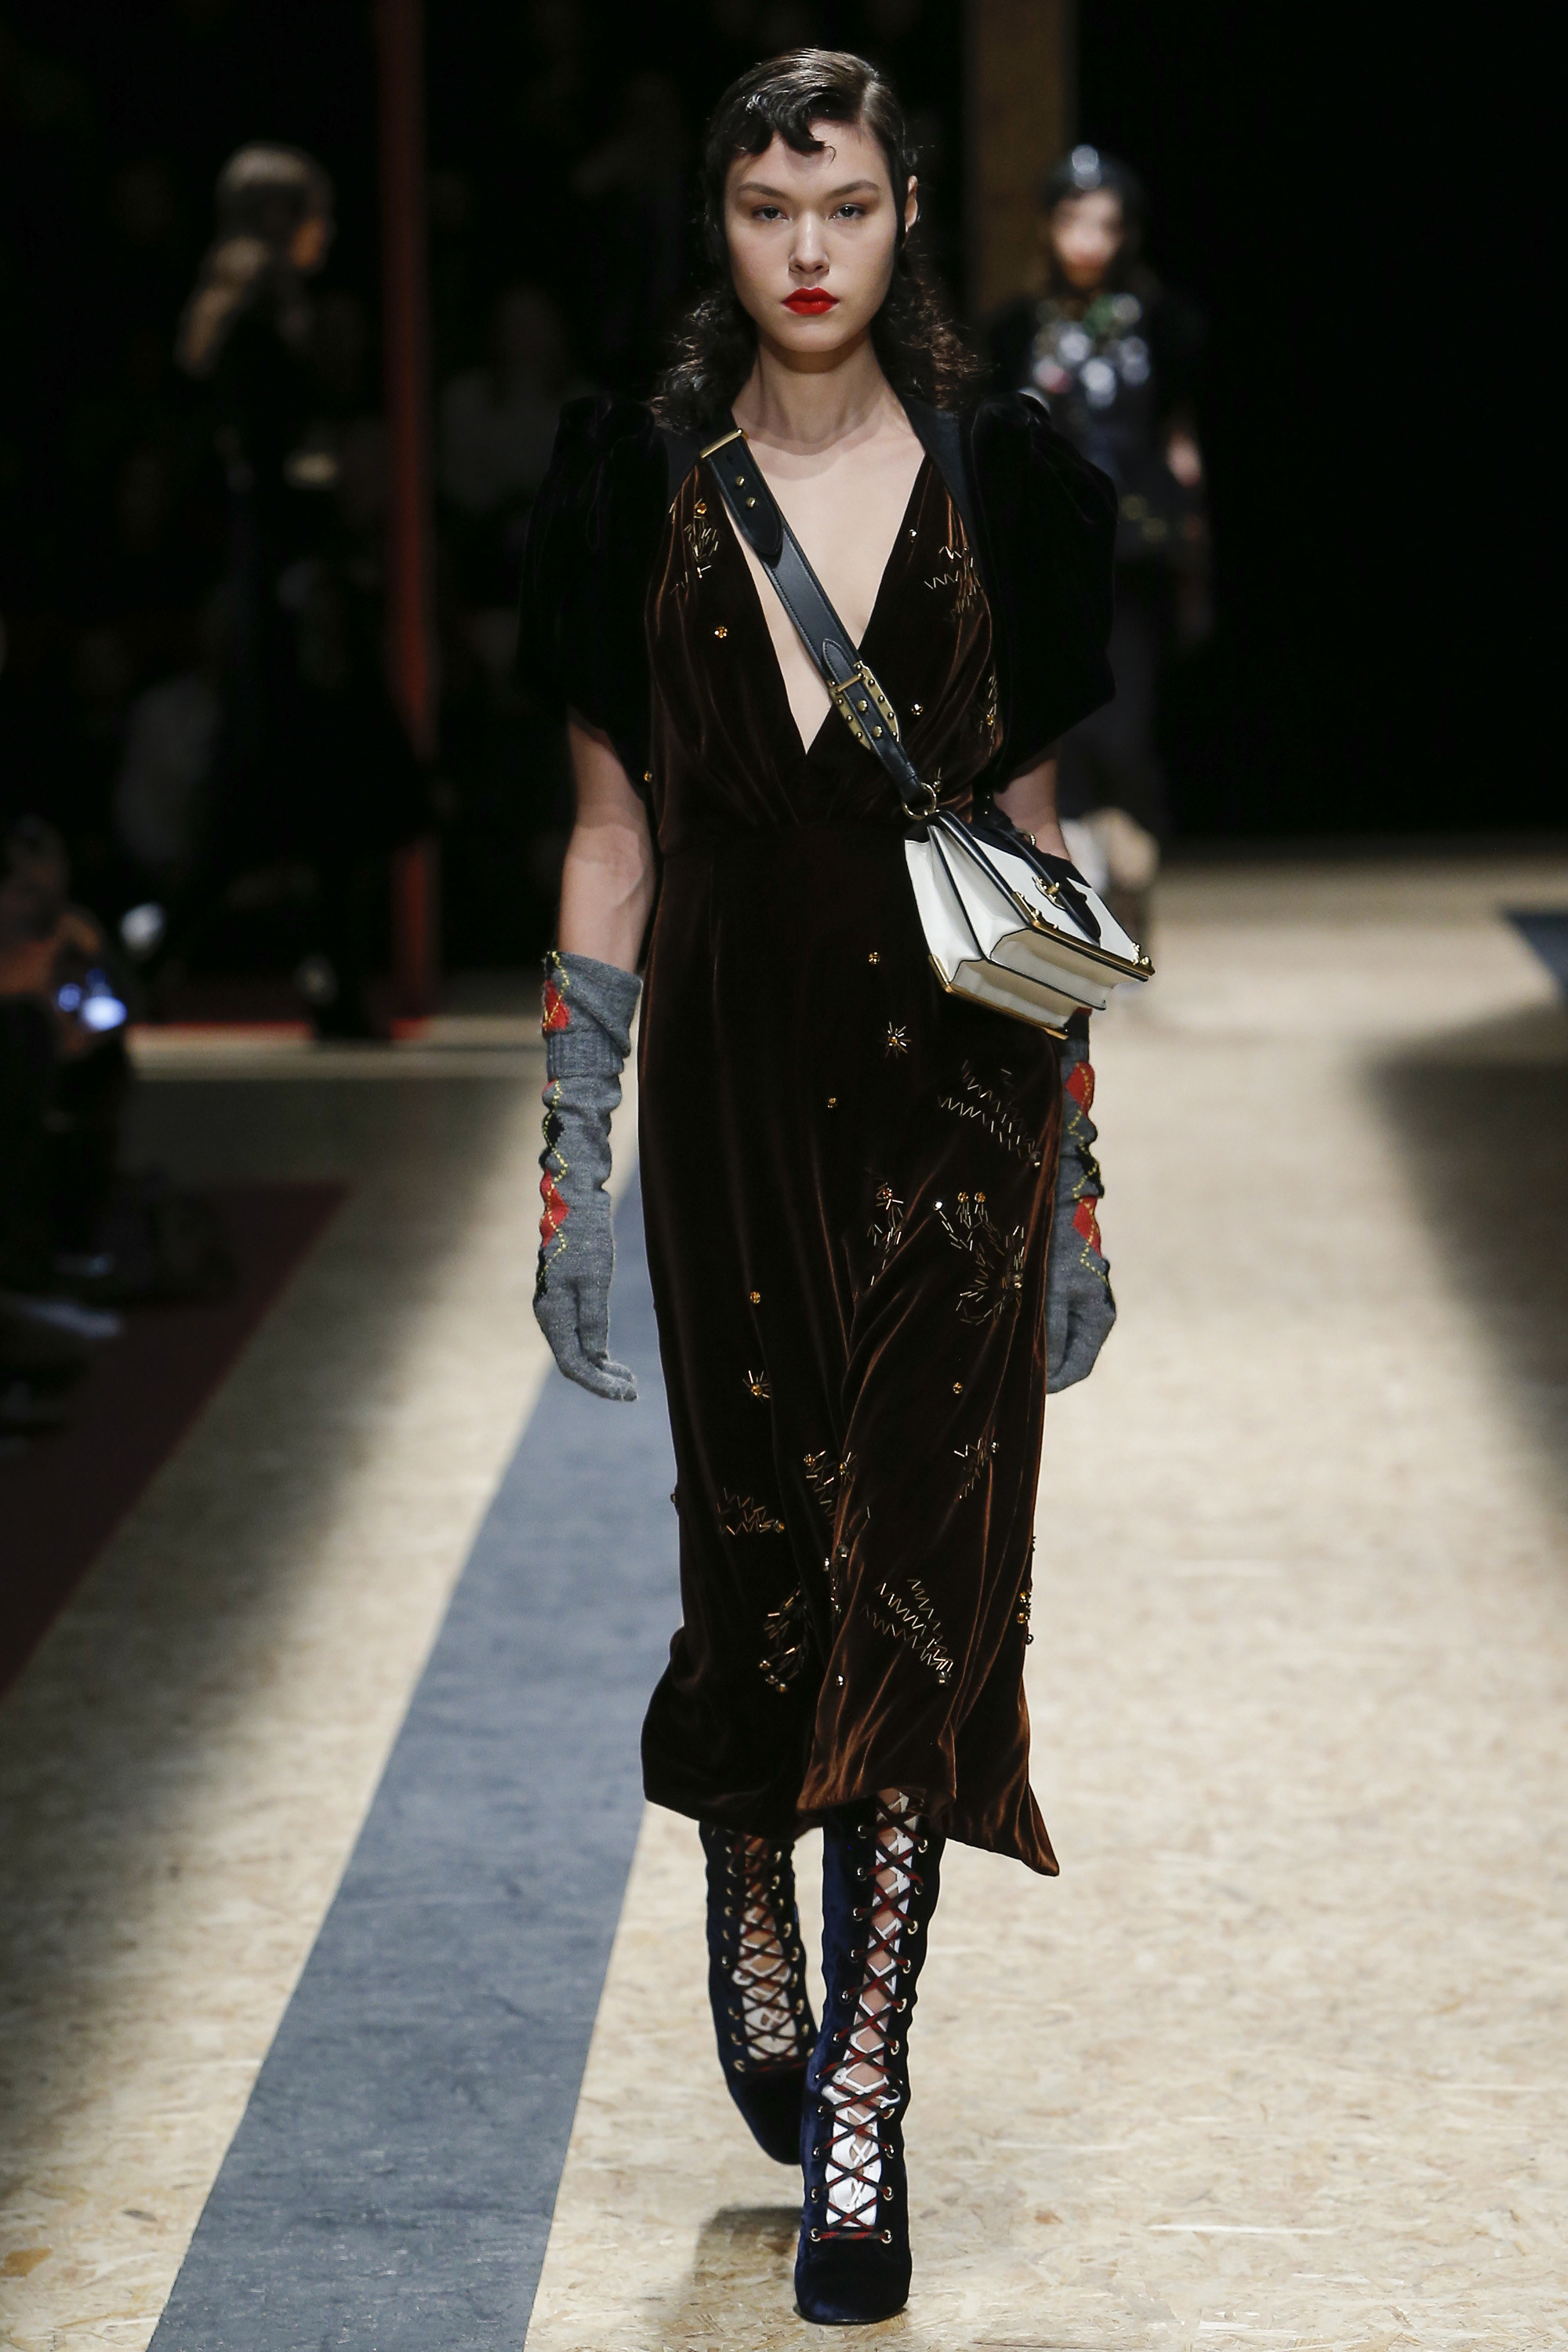 Prada Fall 2016 Ready To Wear – 50s style skirts and tights